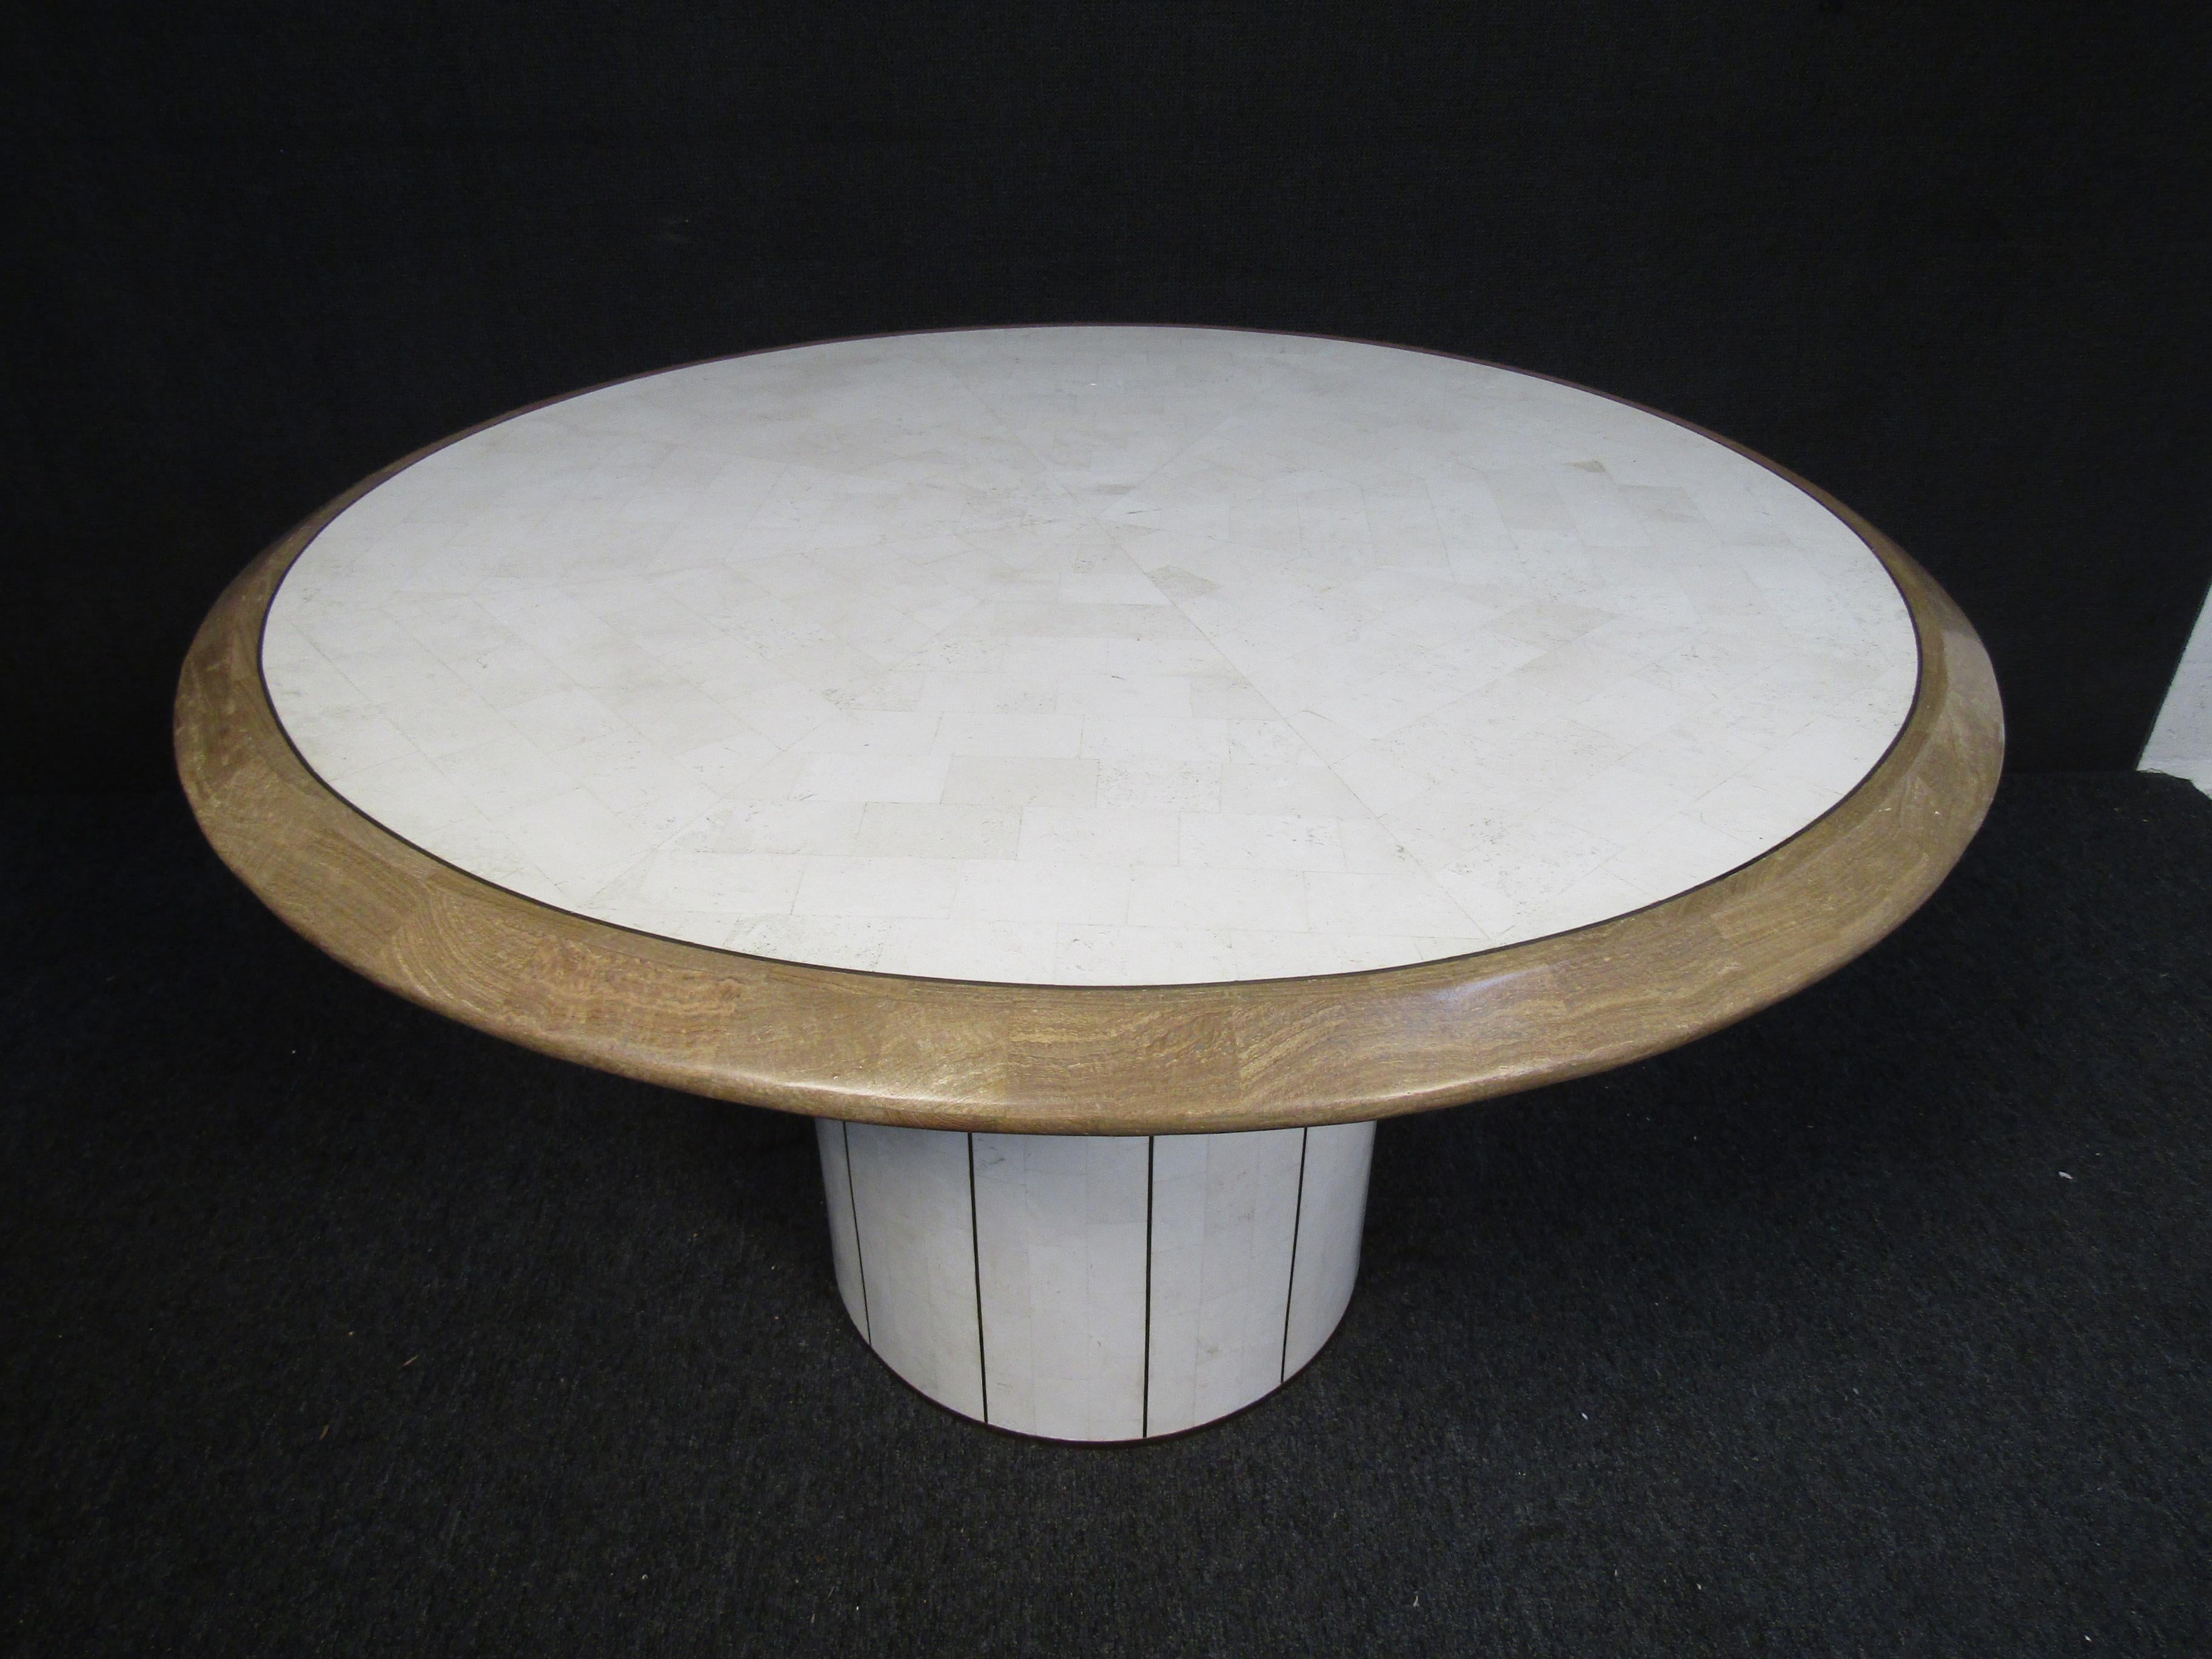 Tessellated marble coffee table with a burl wood edge and inlaid brass border. This piece makes for a great center table and will surely be the topic of conversation. 

Please confirm item location with seller (NY/NJ).